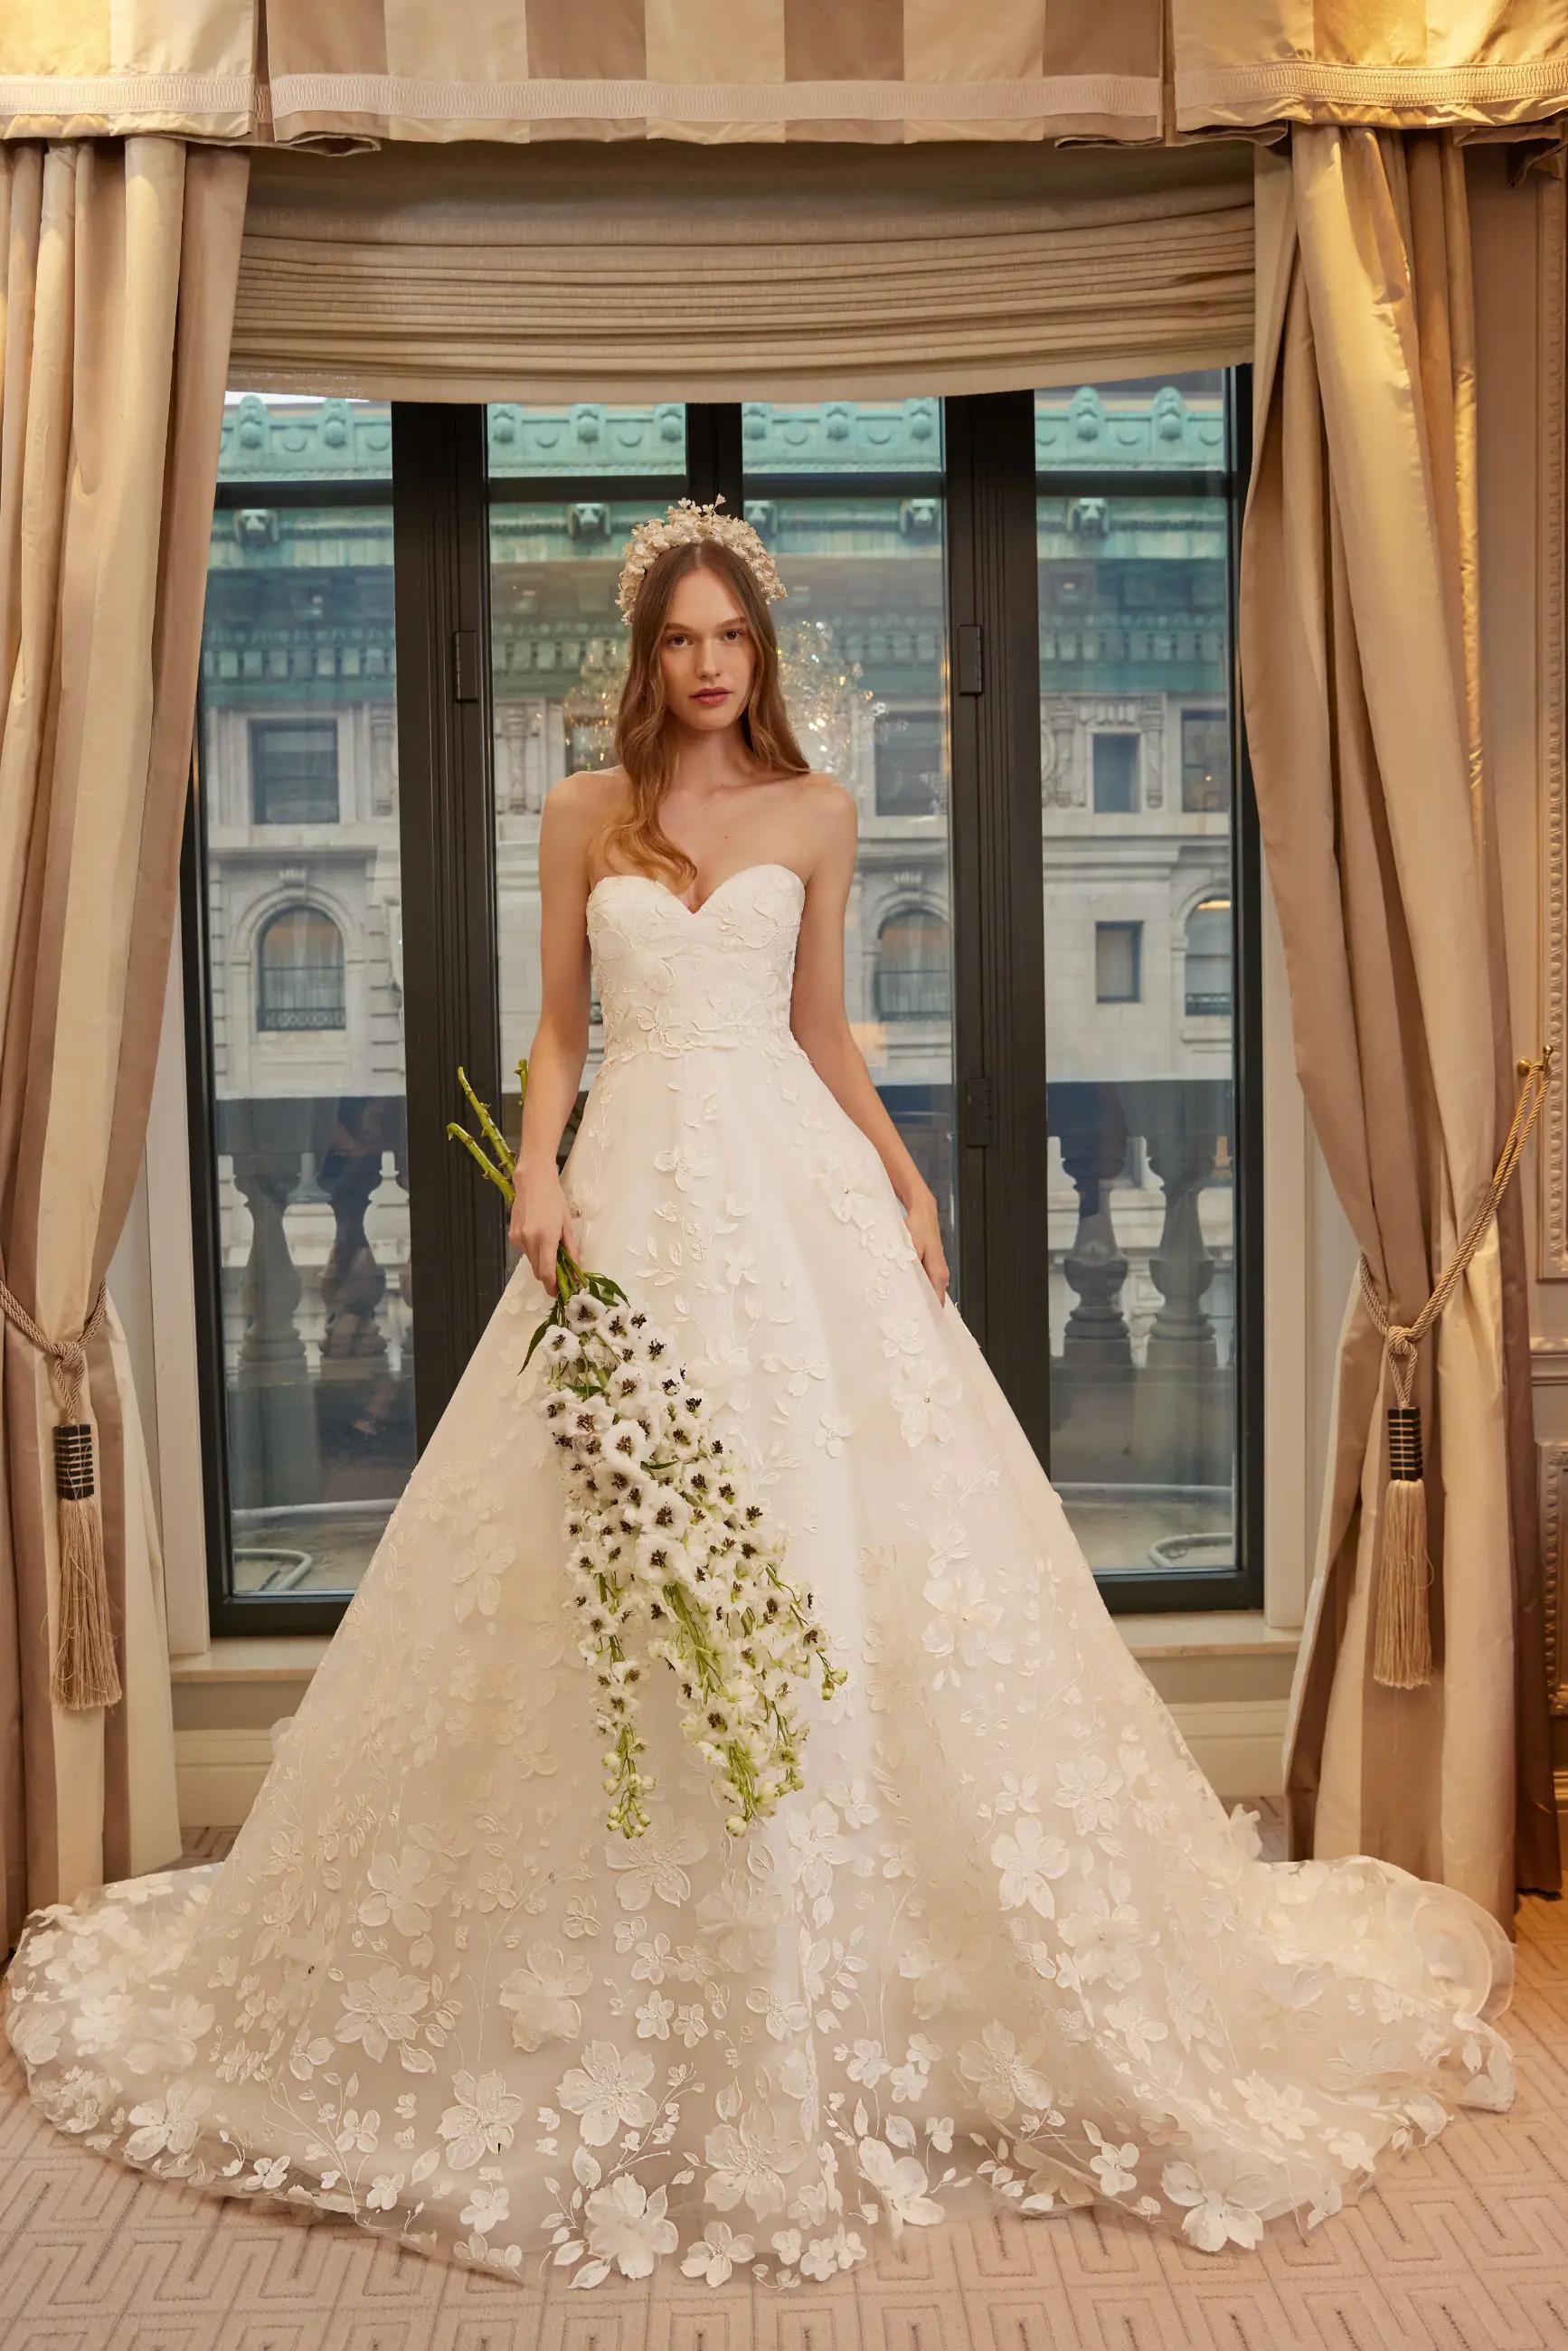 Mimi's Bridal at Town and Country: Mimi's Bridal at Town and Country Trunkshow